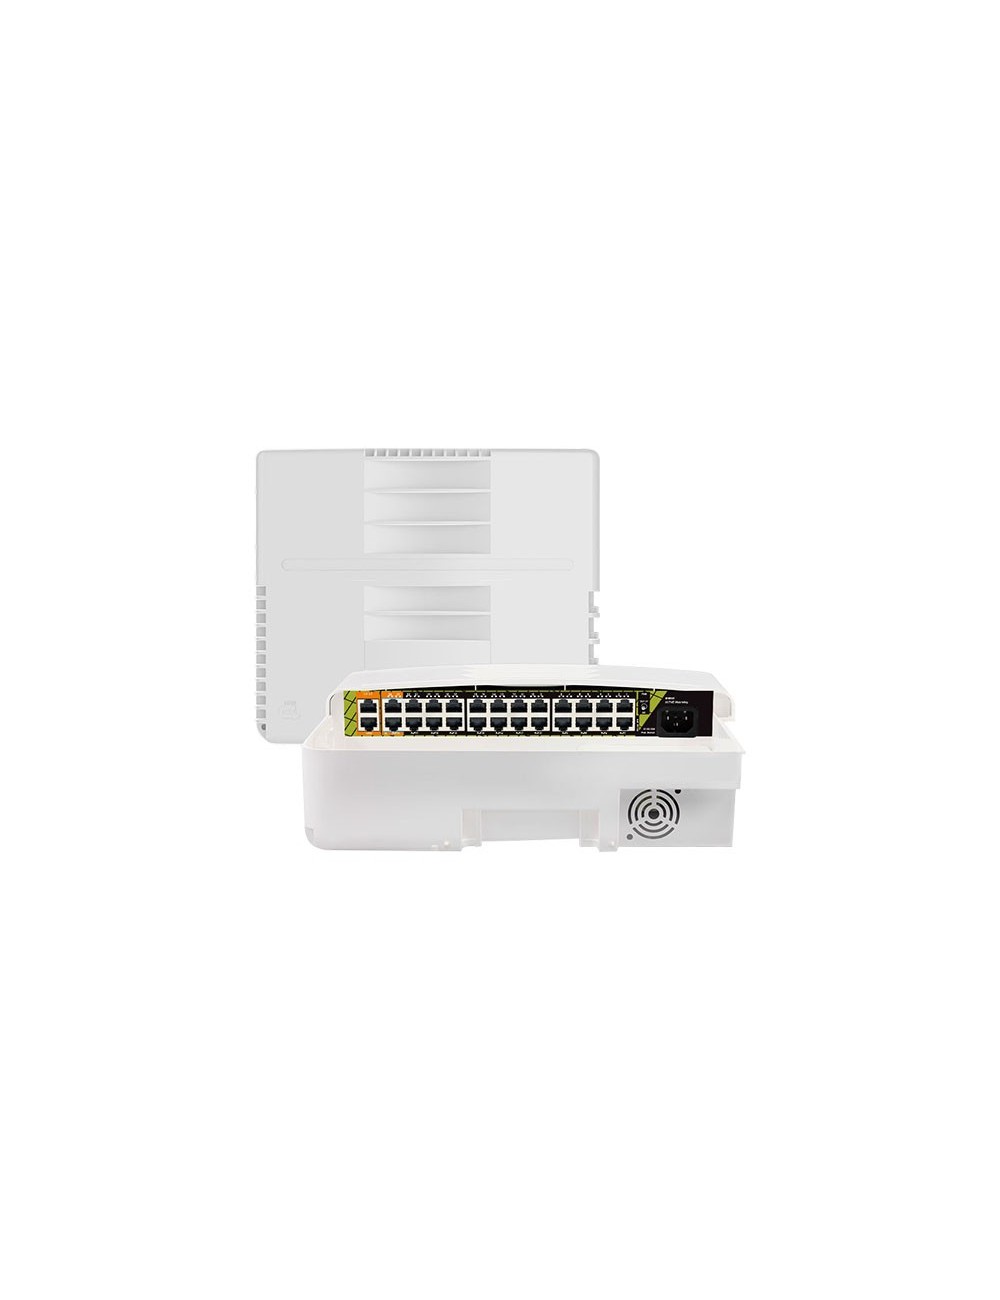 Outdoor switch 26 ports - 24 ports PoE+